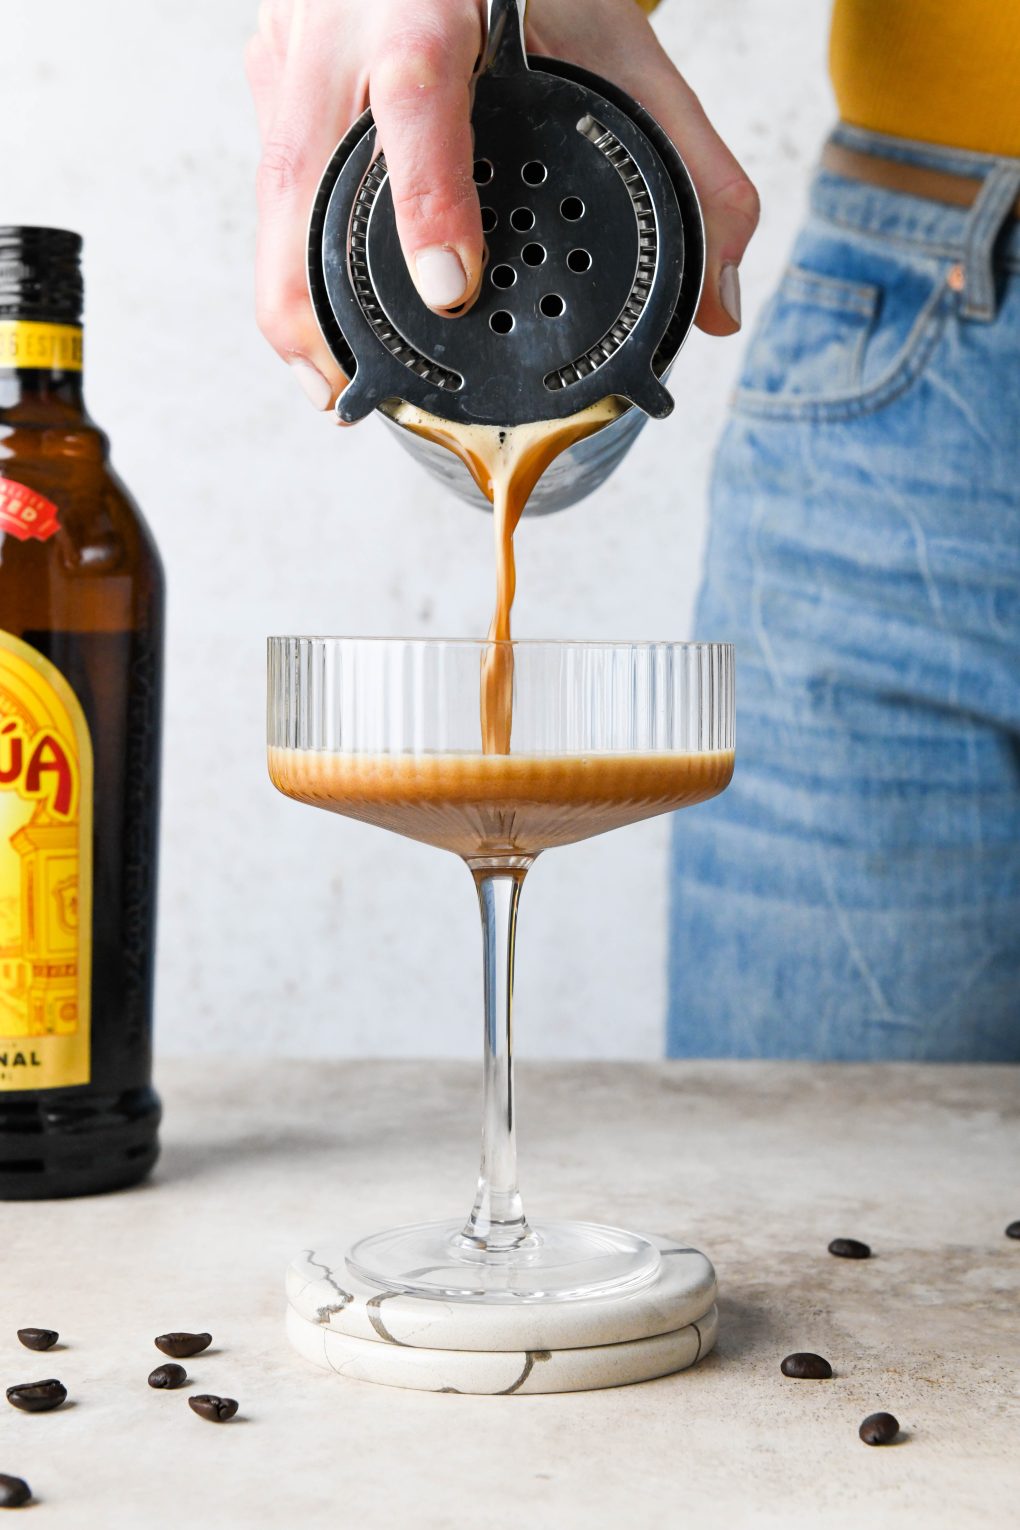 How to make an espresso martini: Starting to pour martini into a coupe glass.